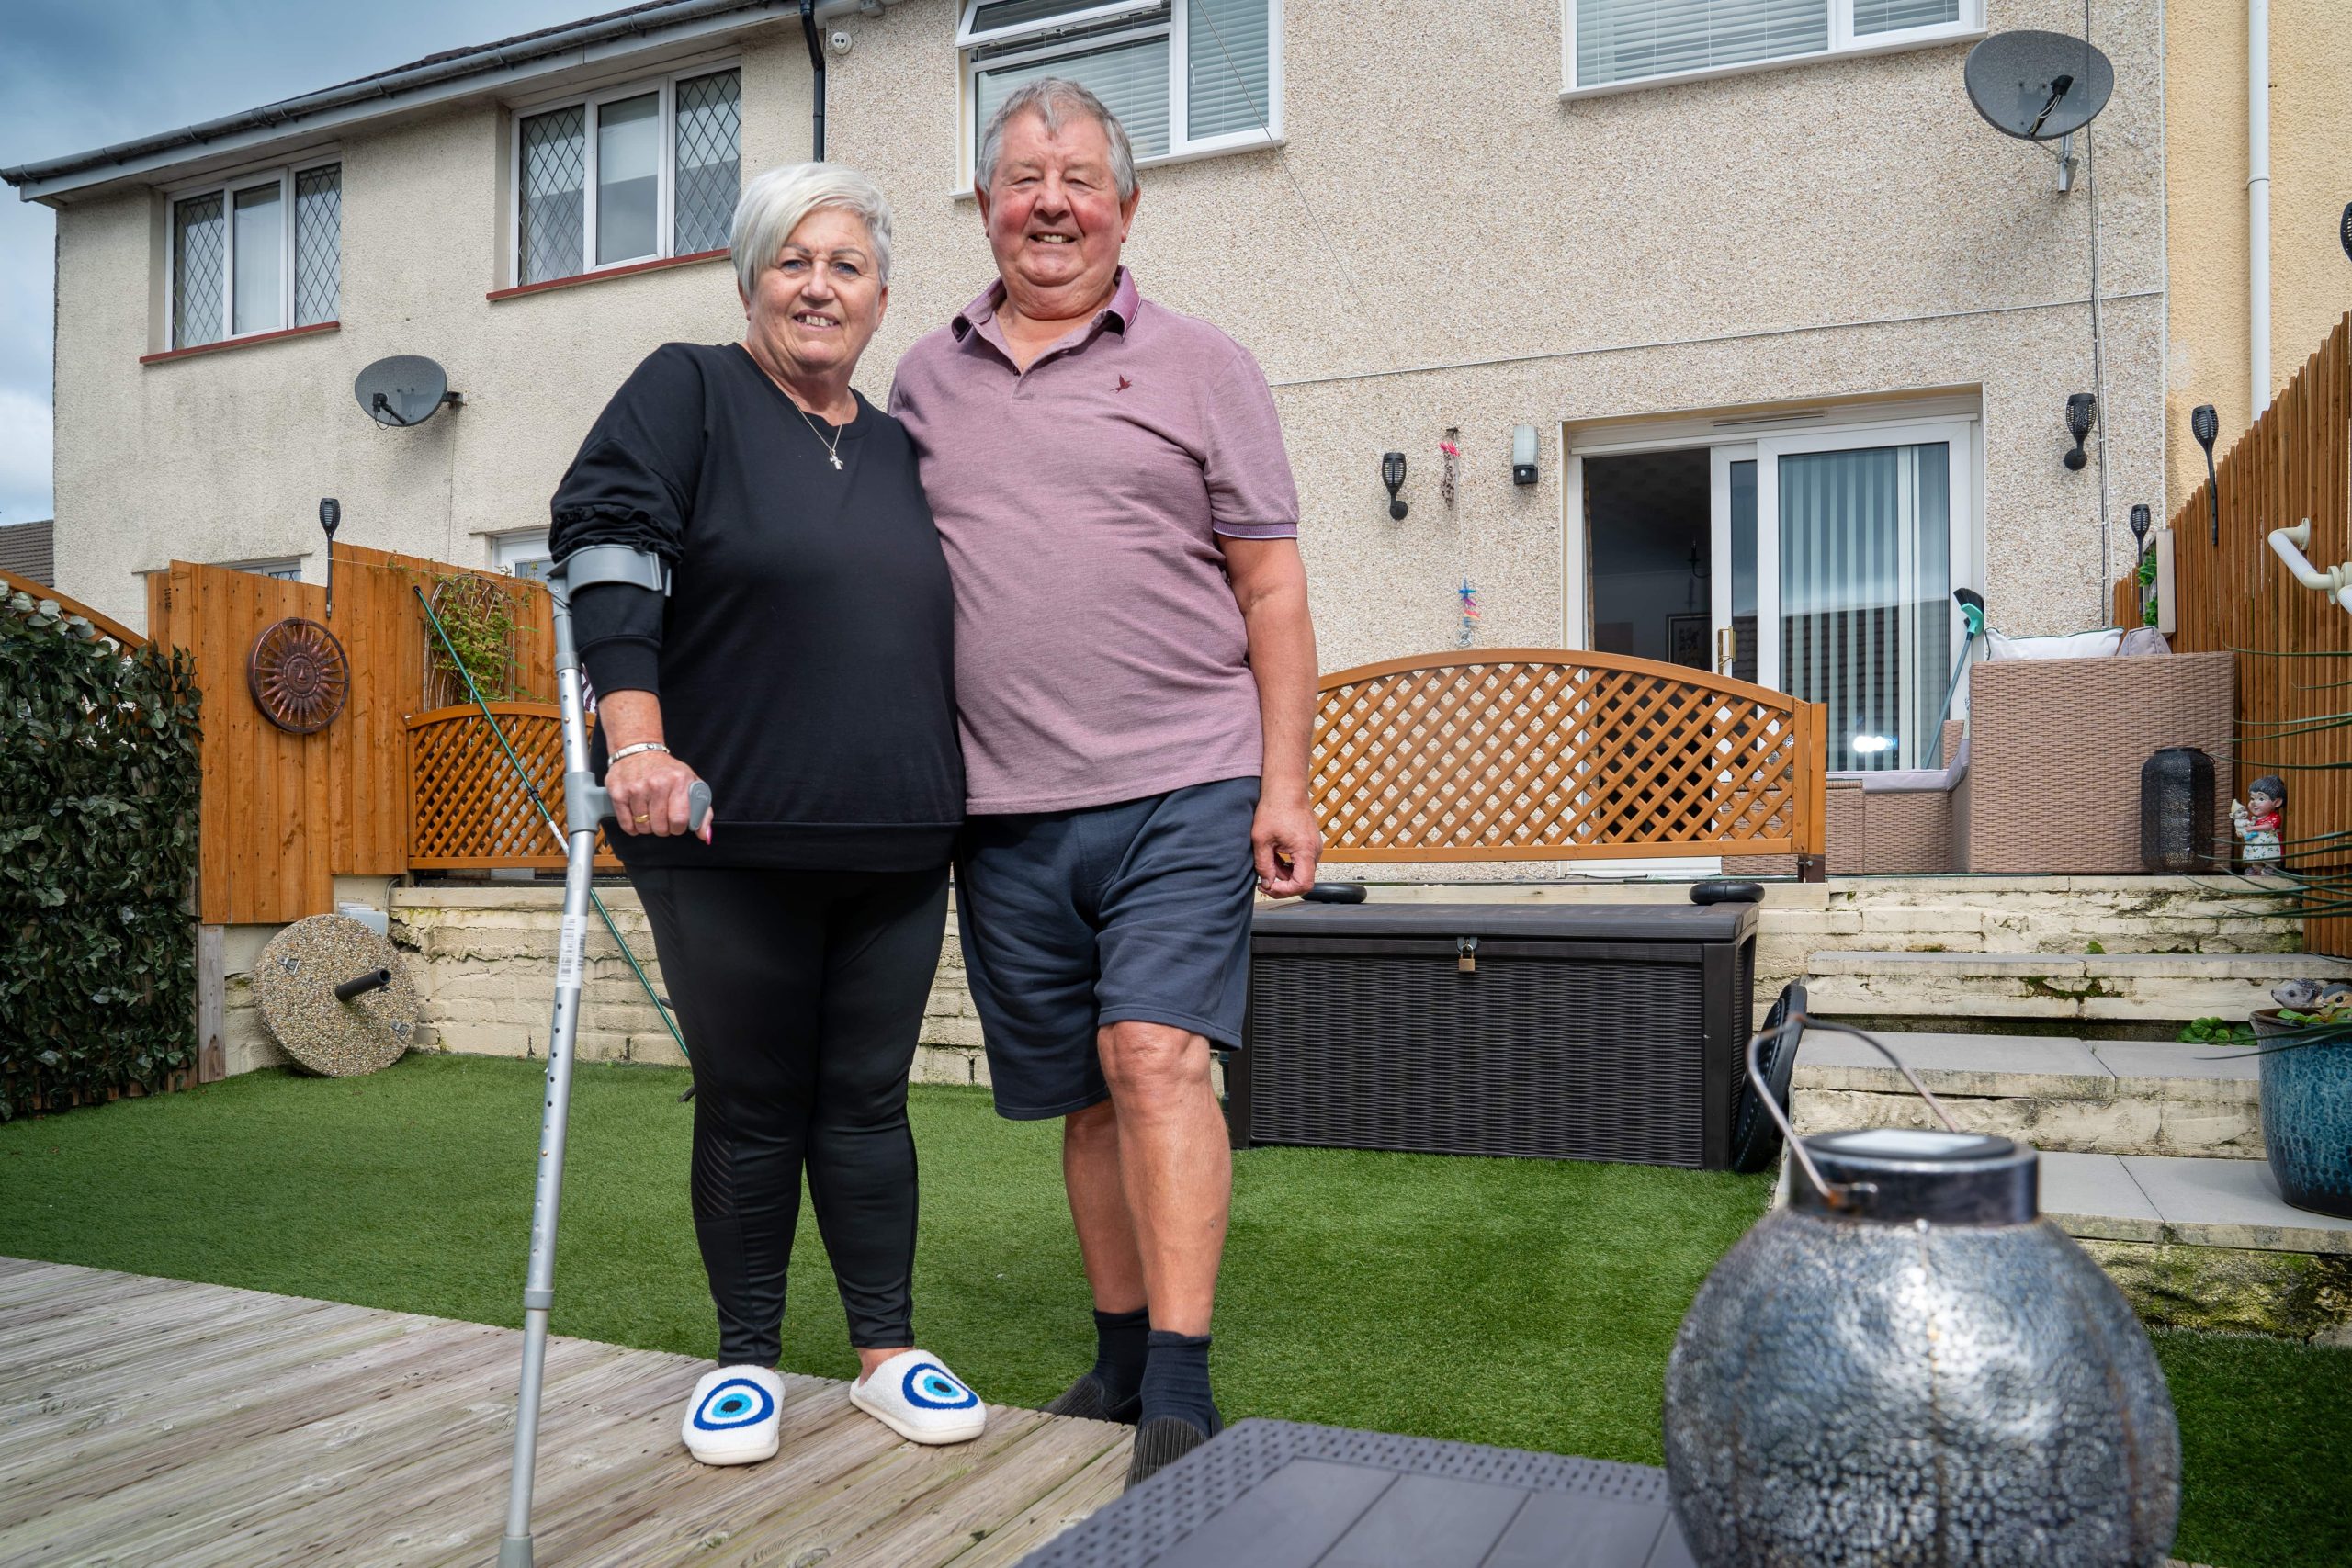 Trivallis Housing Landlord Wales A smiling couple stands together in the backyard of a Trivallis housing residential home, with the woman holding onto a cane and a man with his arm around her.